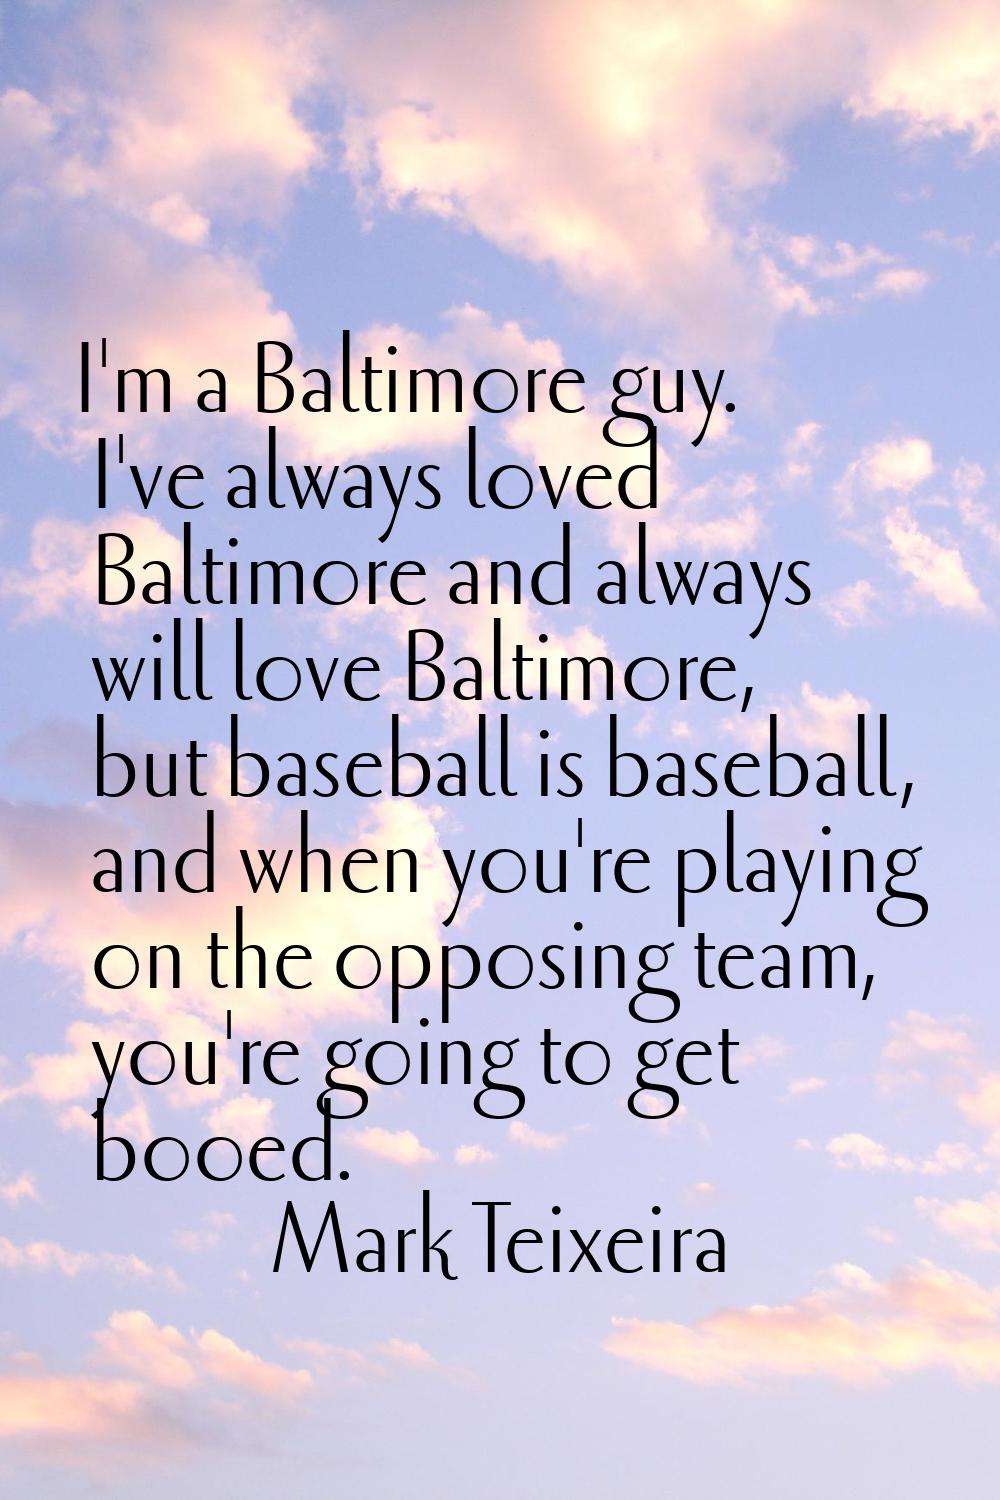 I'm a Baltimore guy. I've always loved Baltimore and always will love Baltimore, but baseball is ba